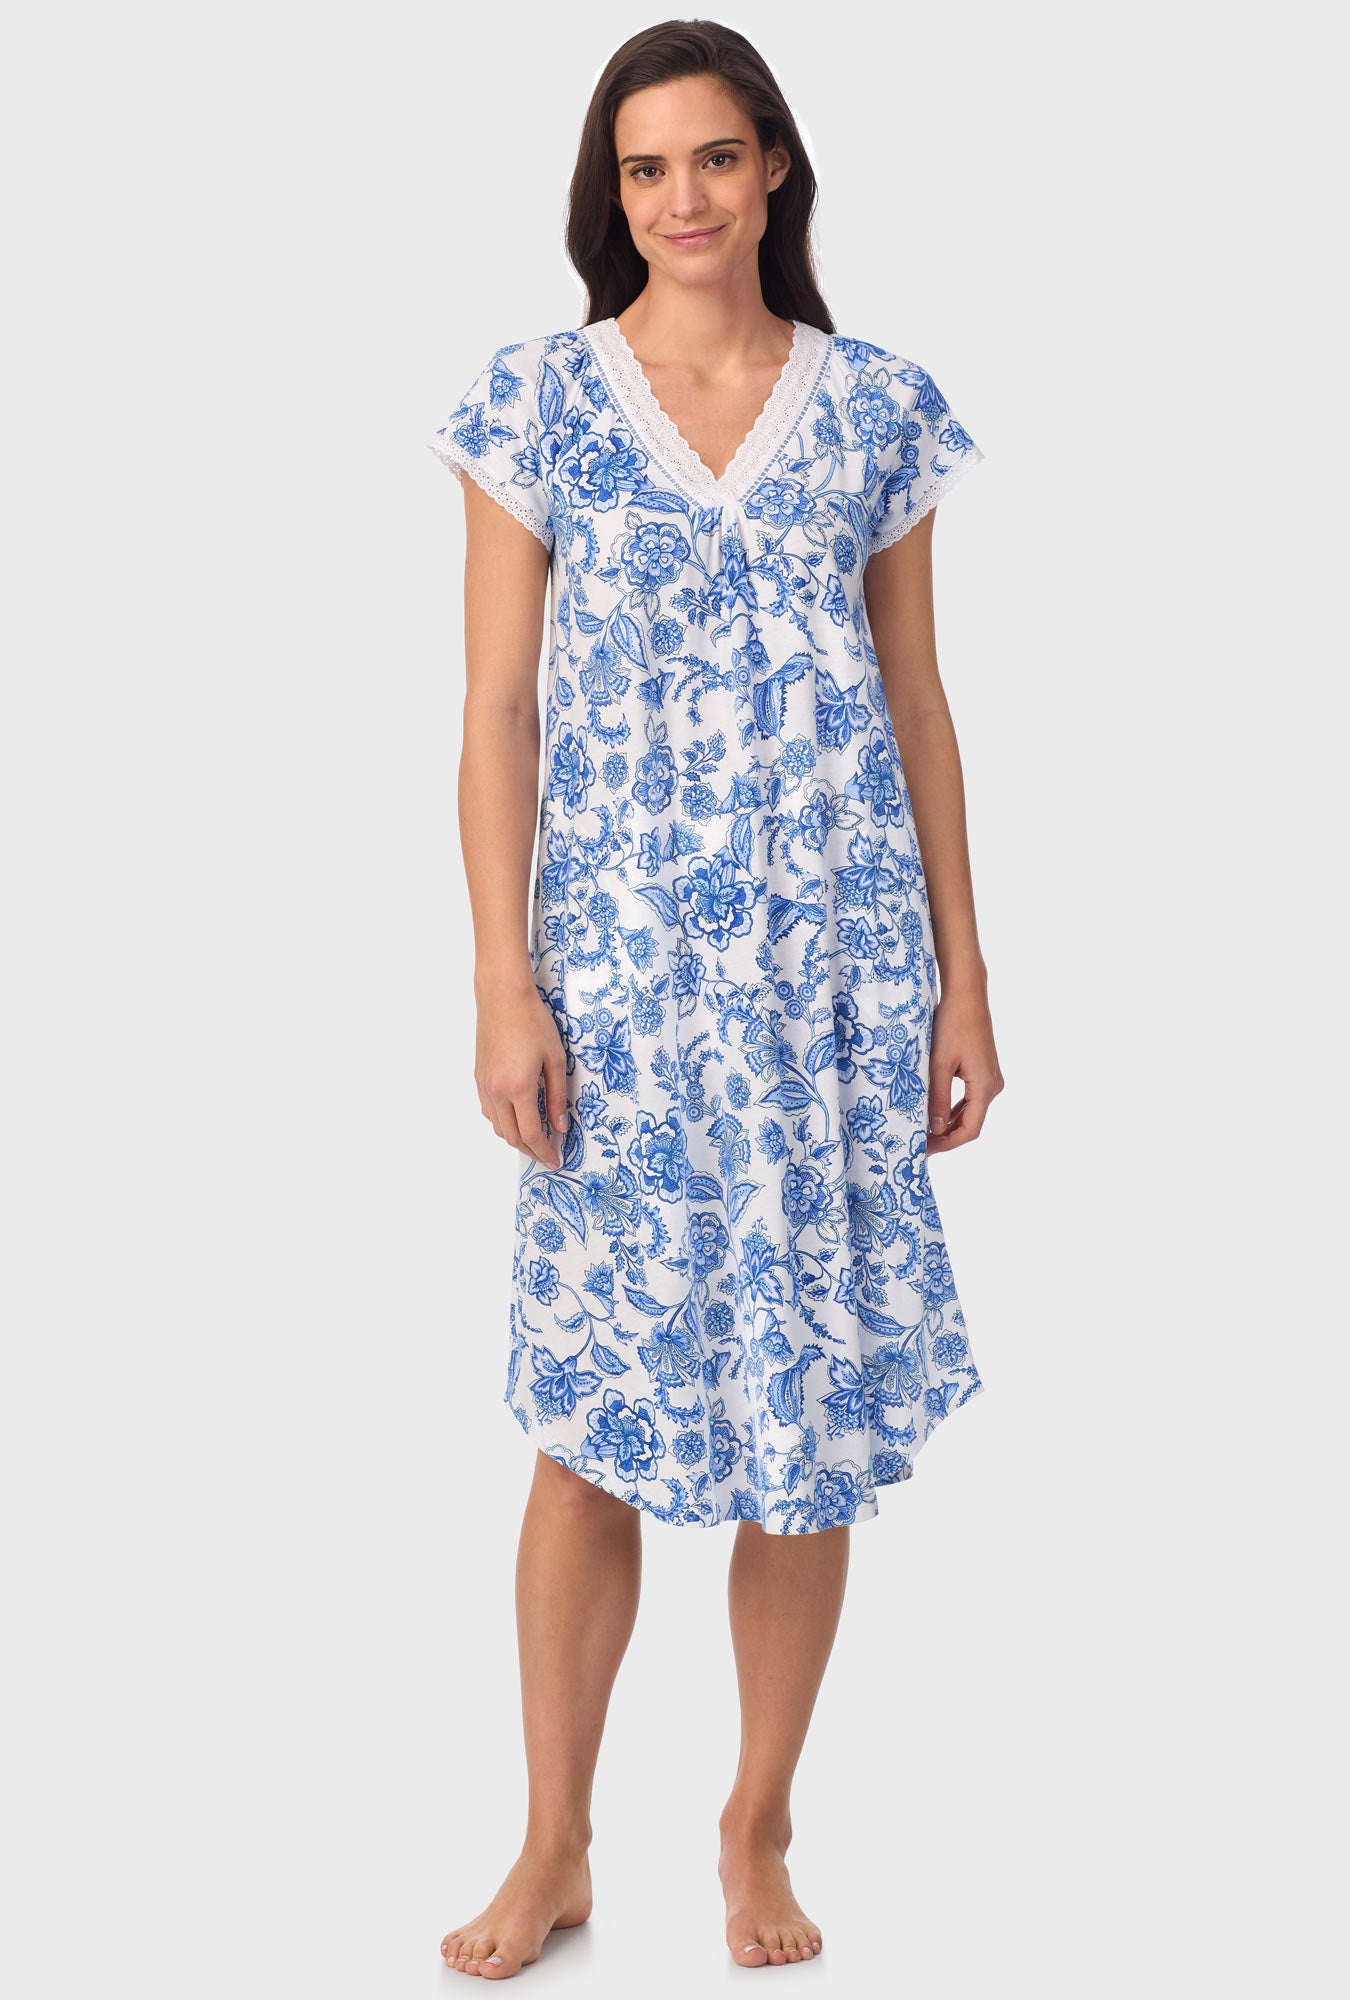 A lady wearing blue short Sleeve Floral Vine Cap Sleeve Nightgown with Colbalt Blue print